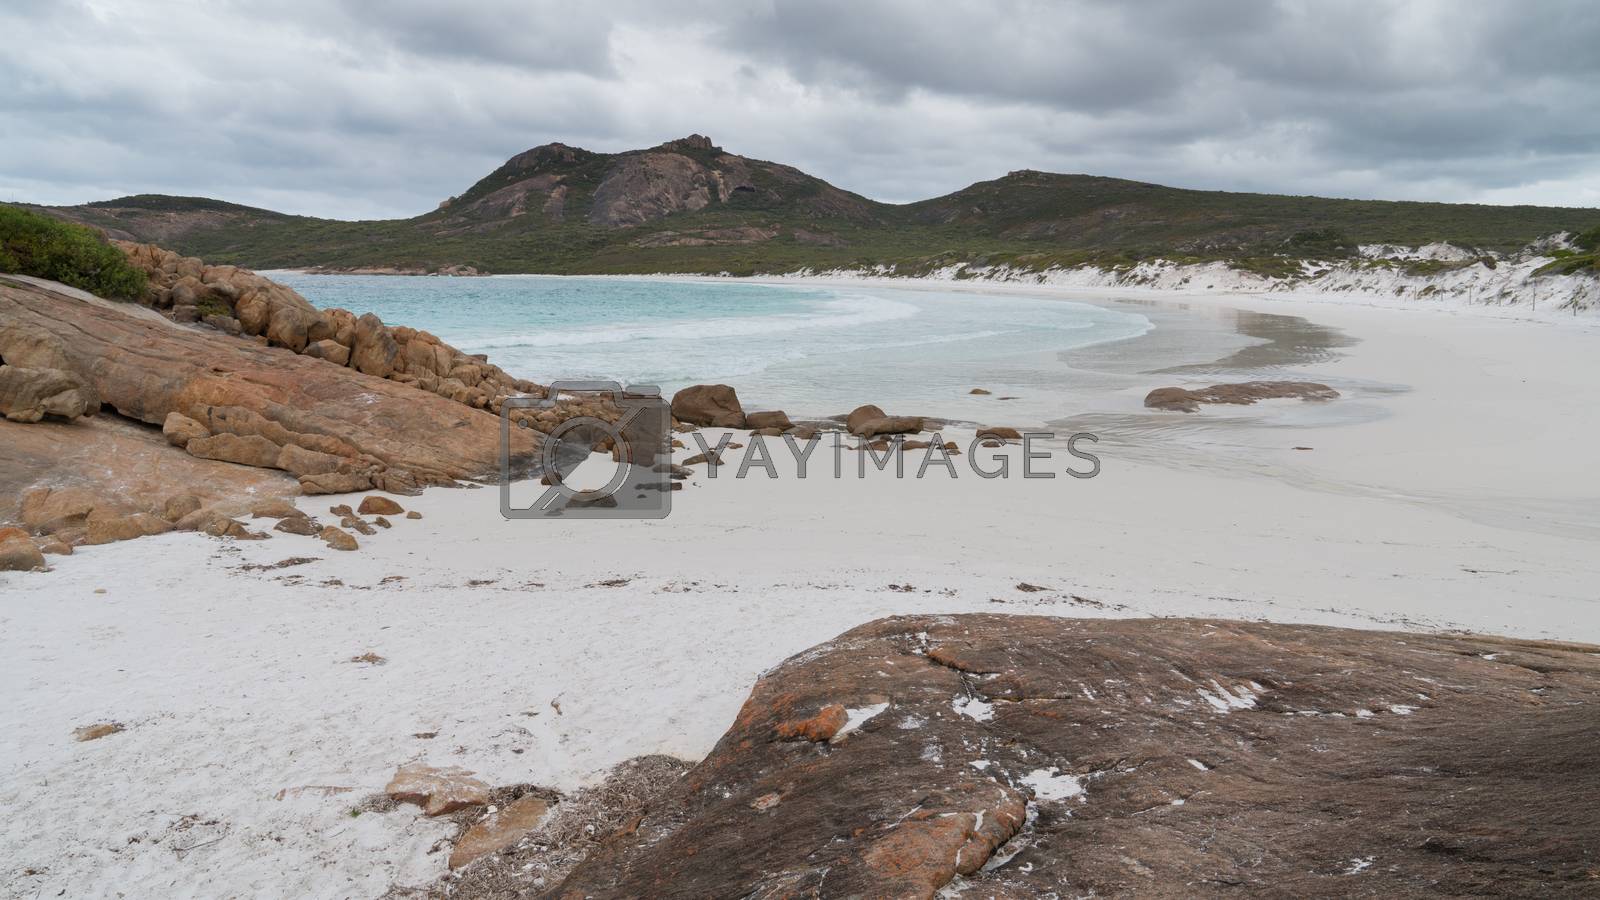 Royalty free image of Cape Le Grand National Park, Western Australia by alfotokunst